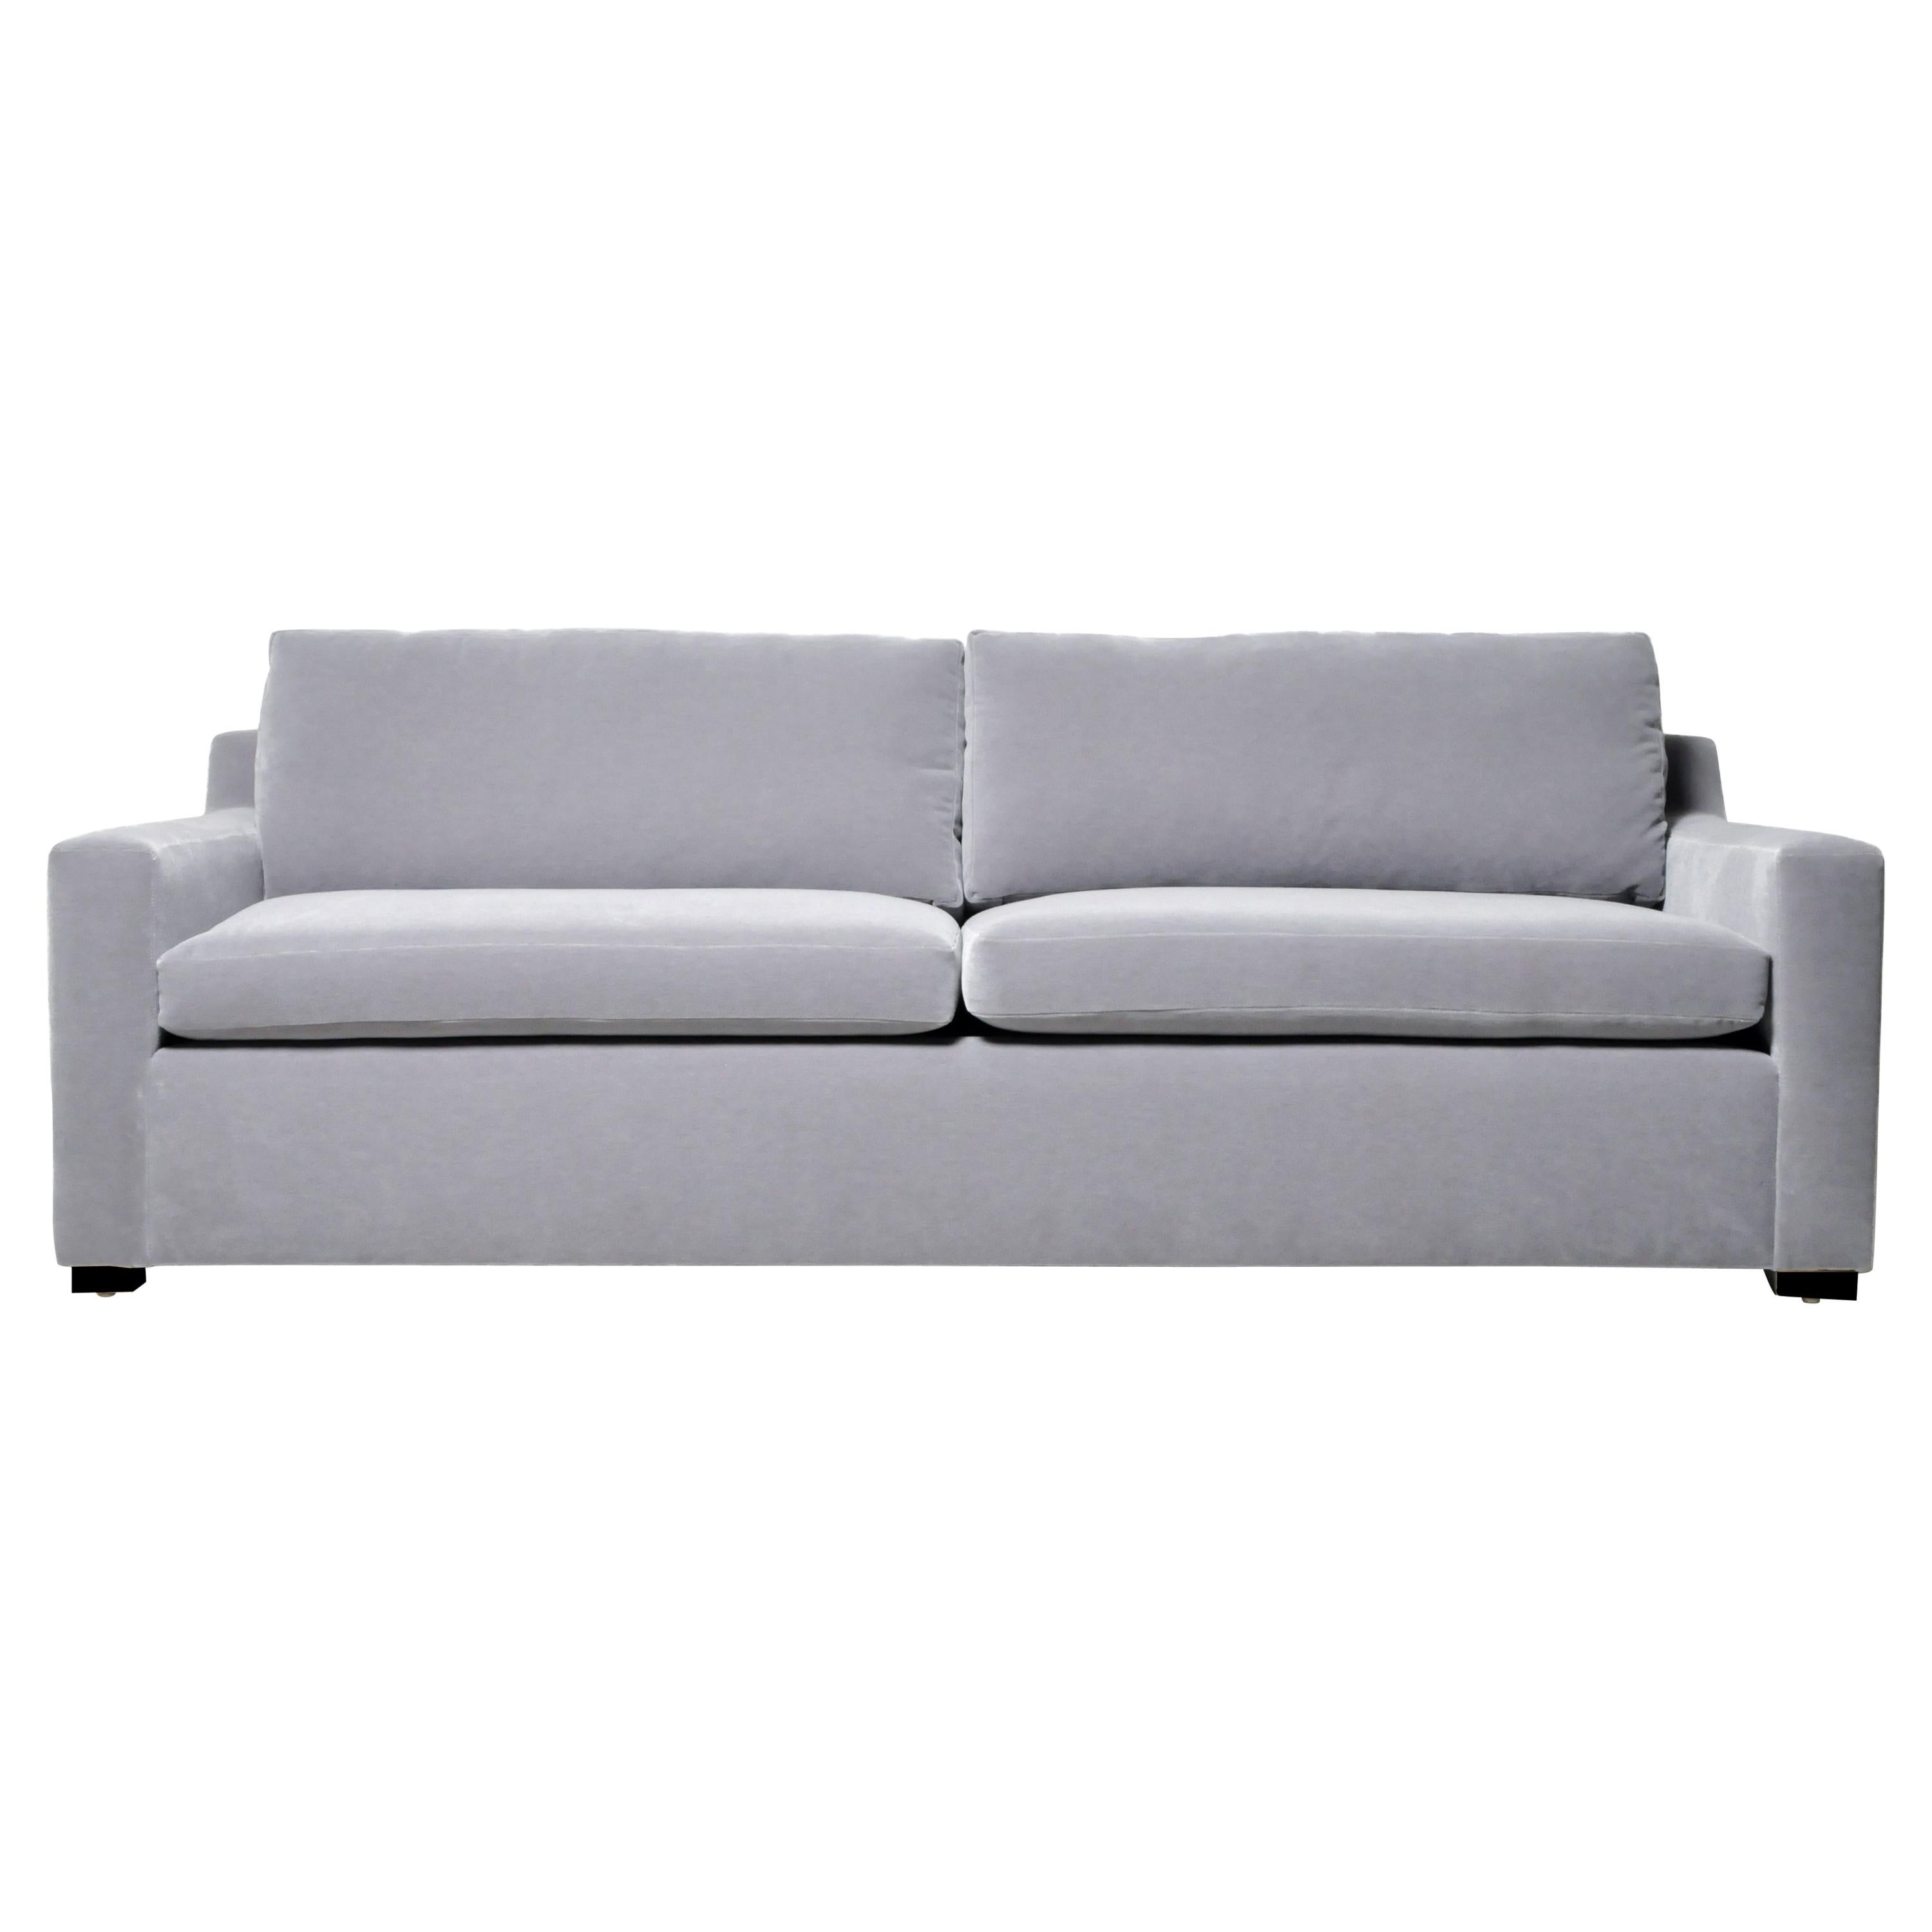 GT Atelier Budapest Sofa For Sale